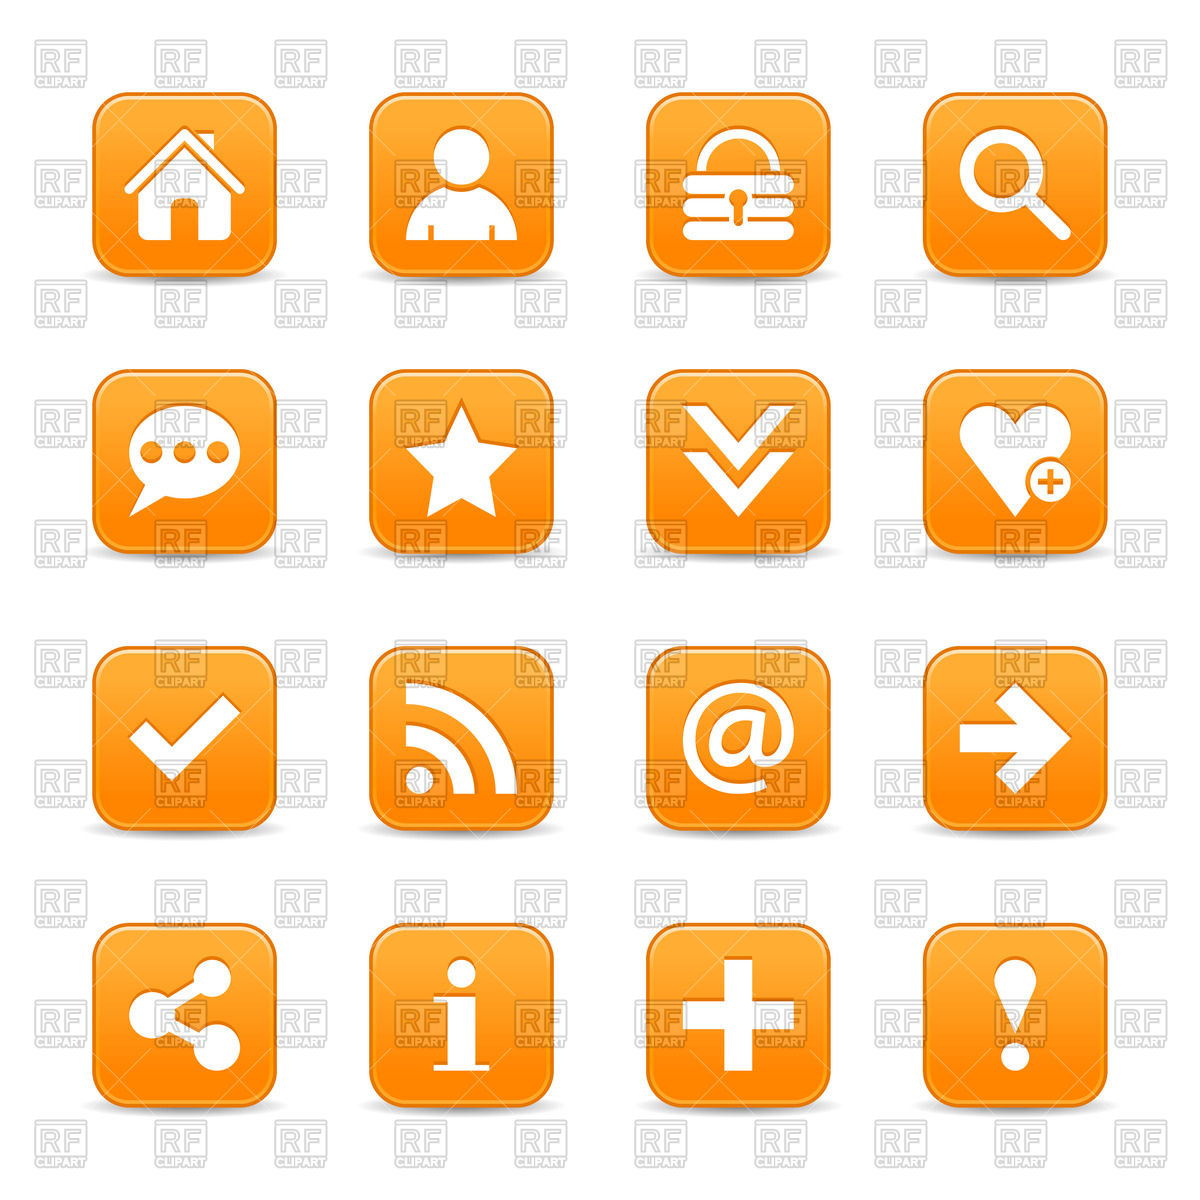 Orange Square Buttons   Set Of Basic Icons 50425 Download Royalty